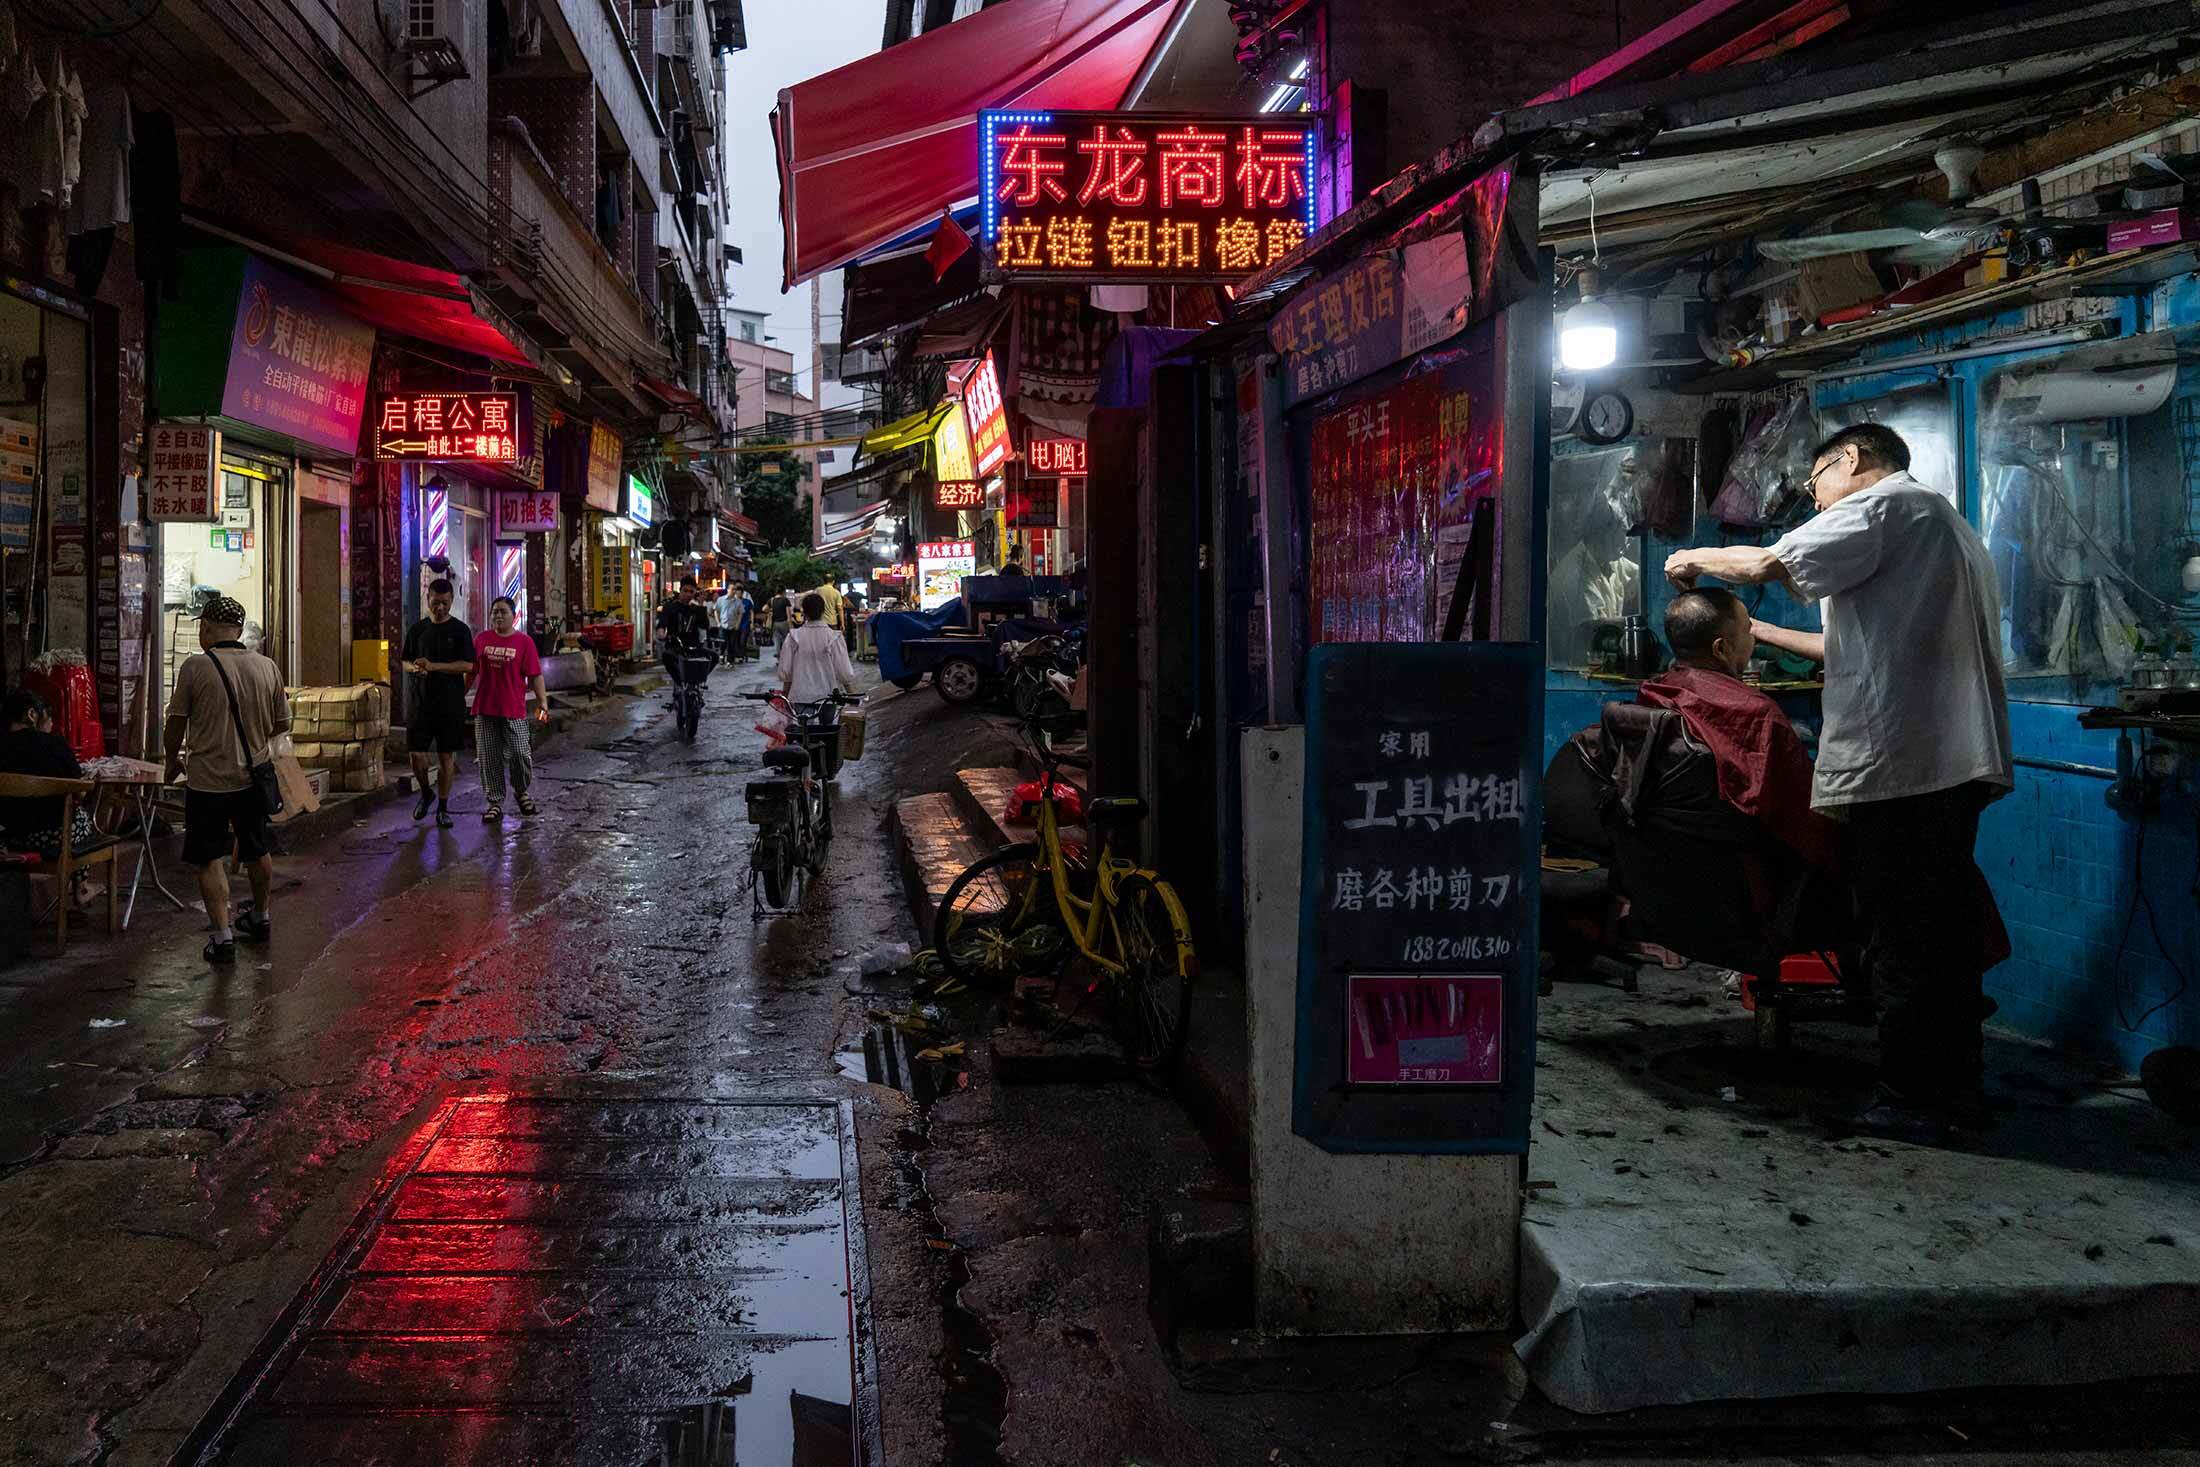 A side street in Guangzhou earlier this spring.